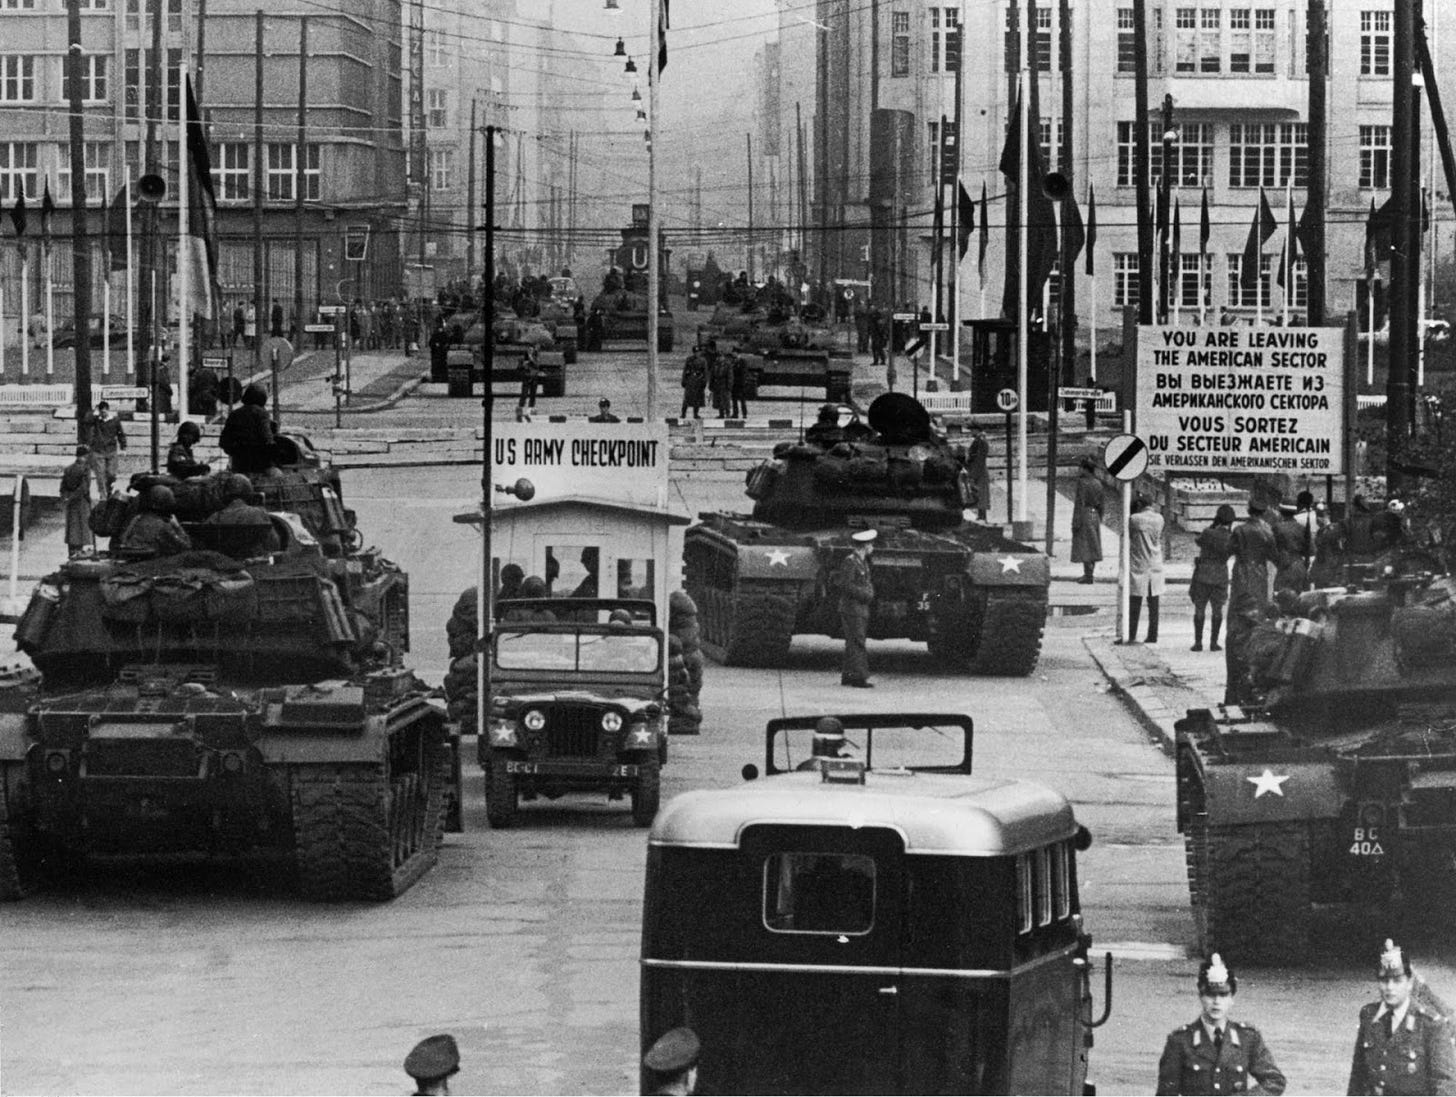 [Sourcet: USAMHI - http://www.army.mil/article/46993/standoff-in-berlin-october-1961/, Public Domain, https://commons.wikimedia.org/w/index.php?curid=16657120]